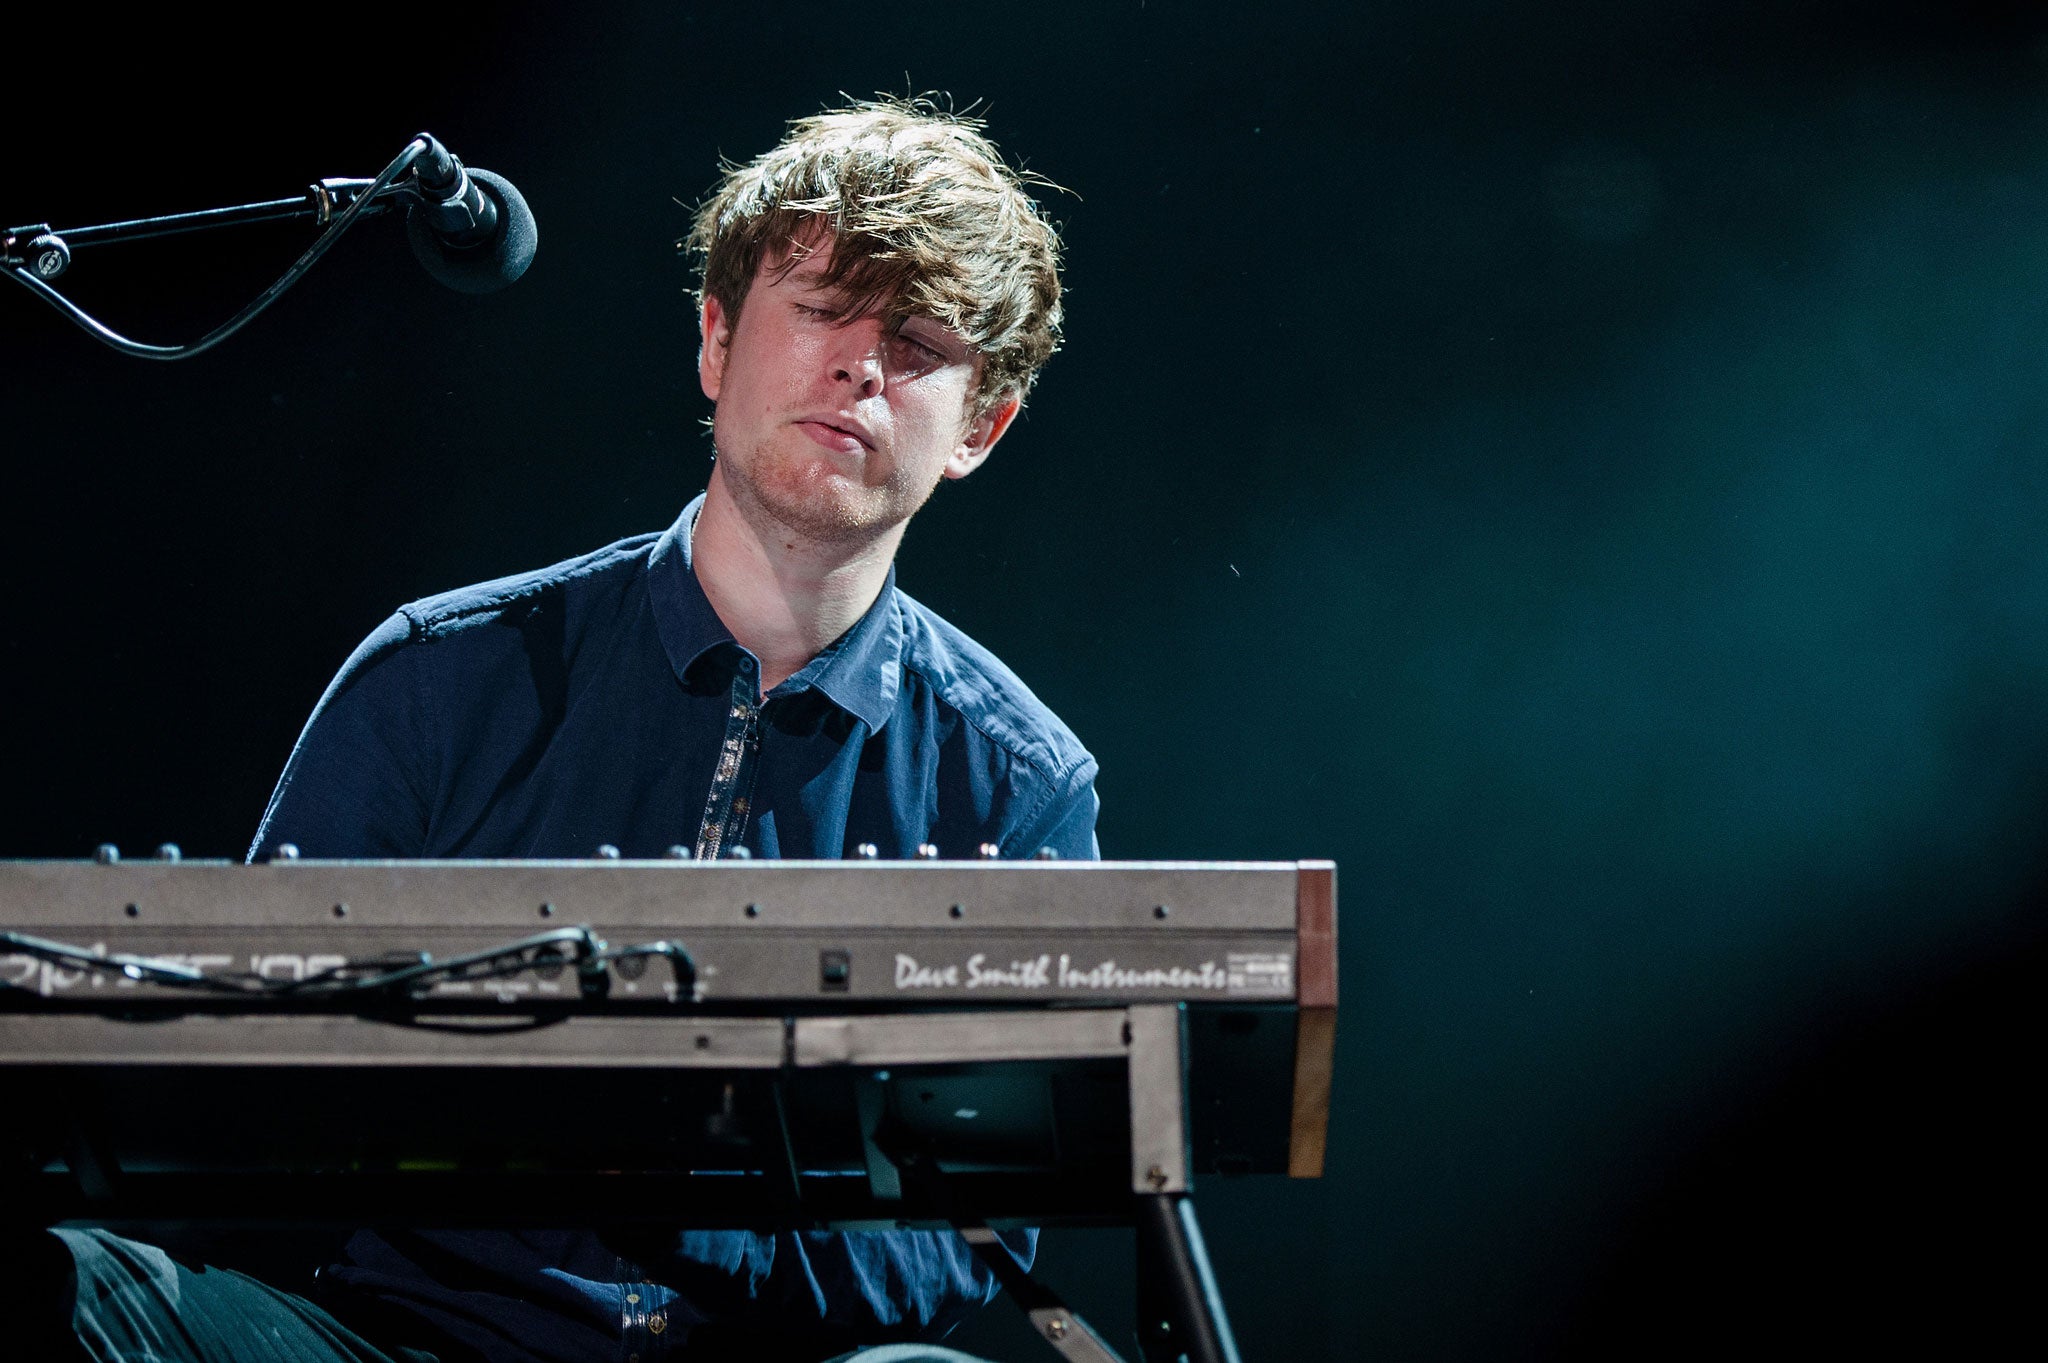 James Blake will appear at Glastonbury Festival on the Woodsies stage